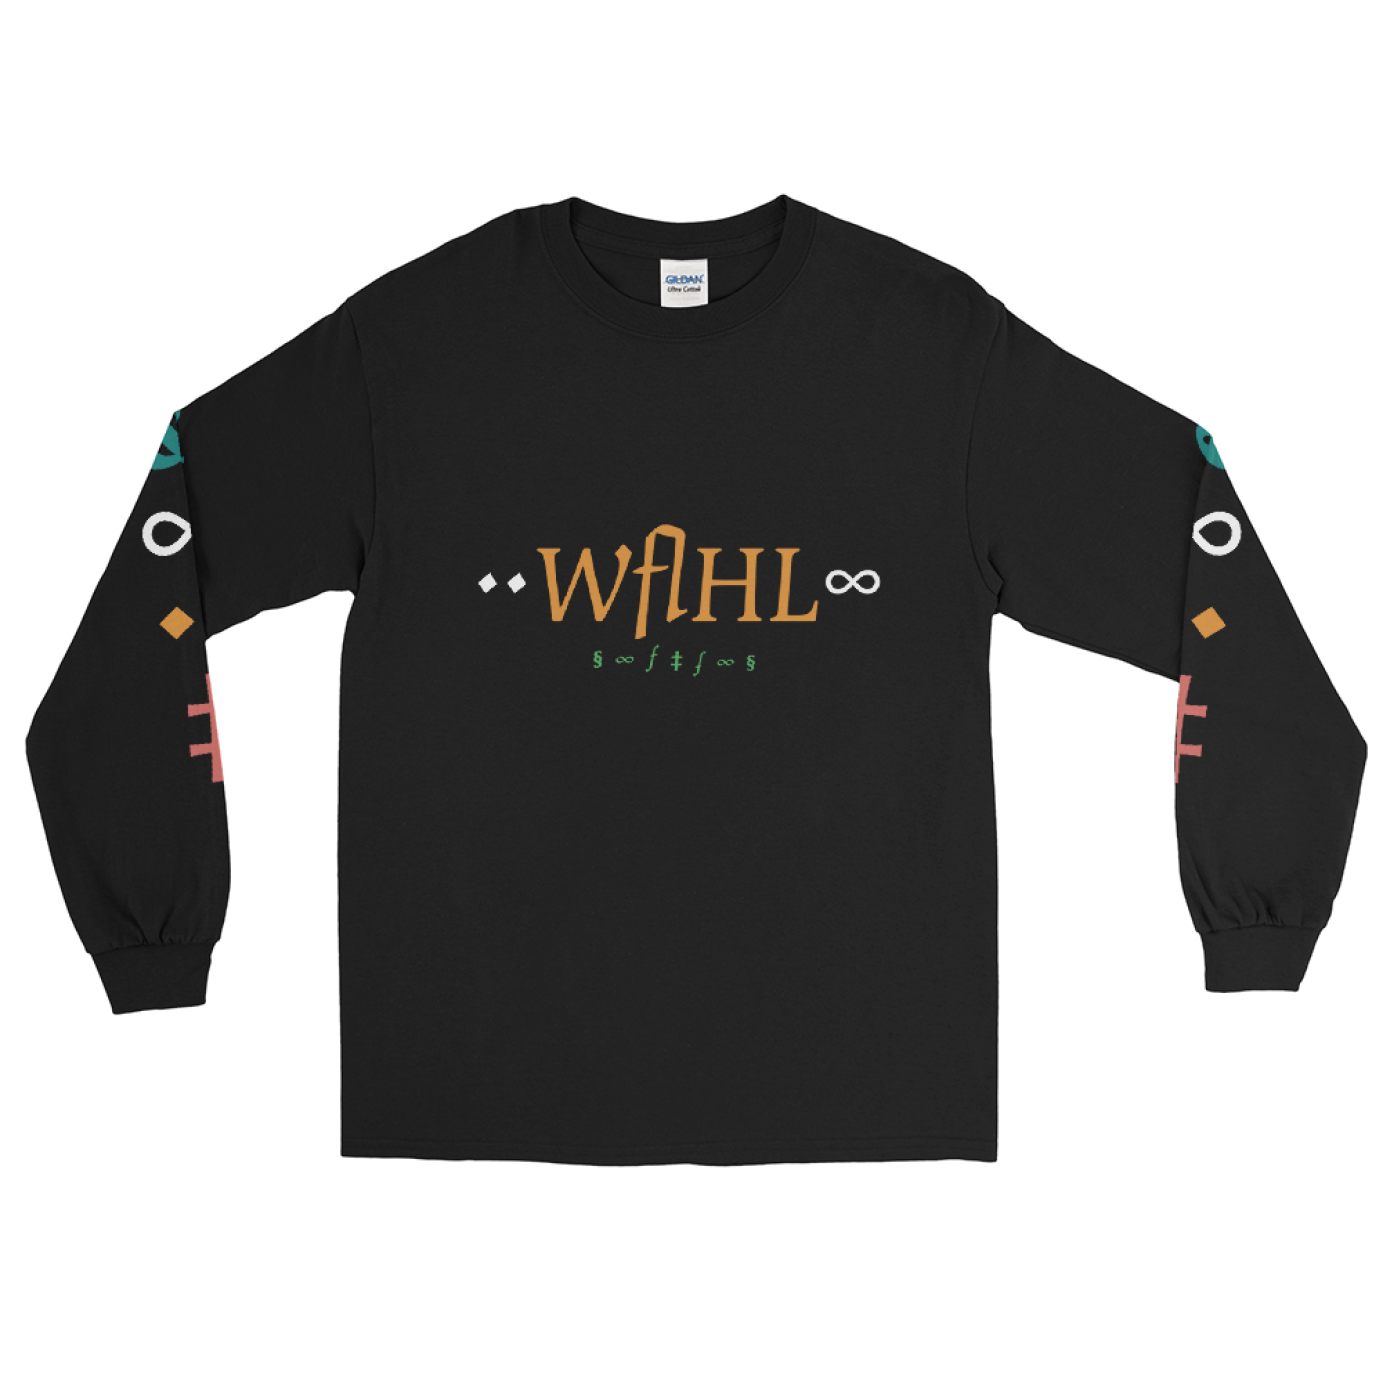 Logo rebrand and merch launch for London duo WAHL